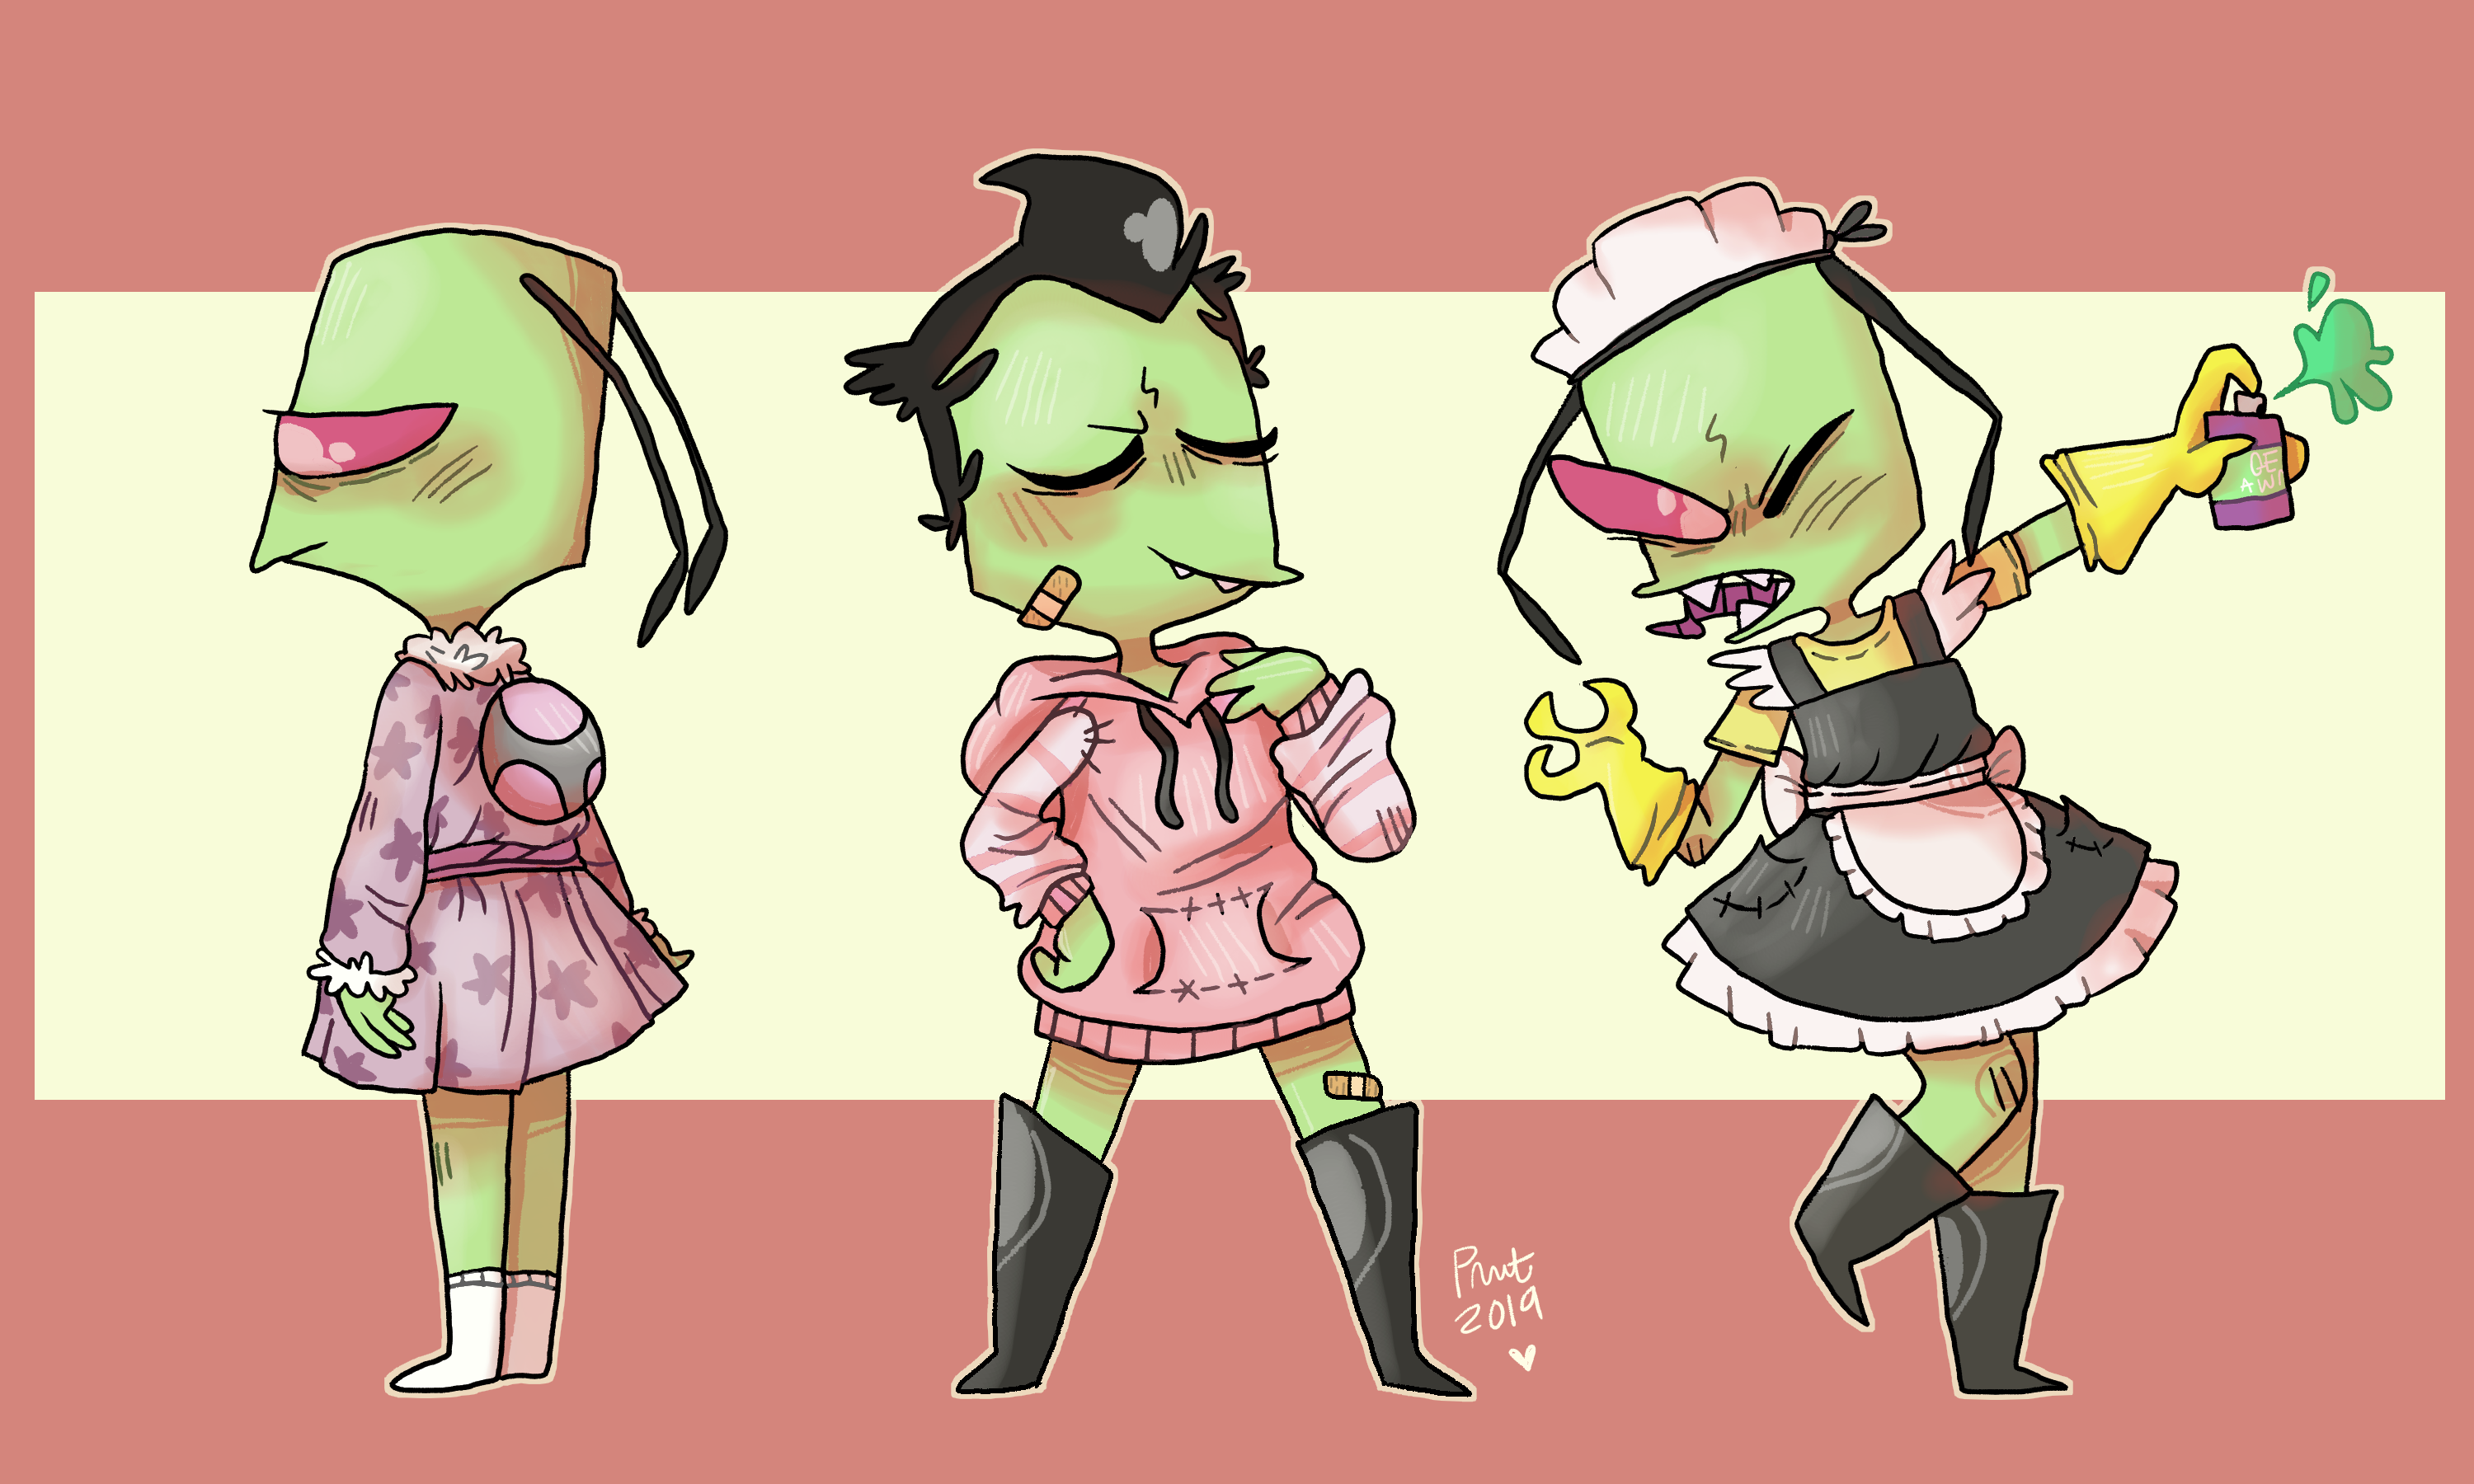 Zim outfits by peanutcat62 on DeviantArt